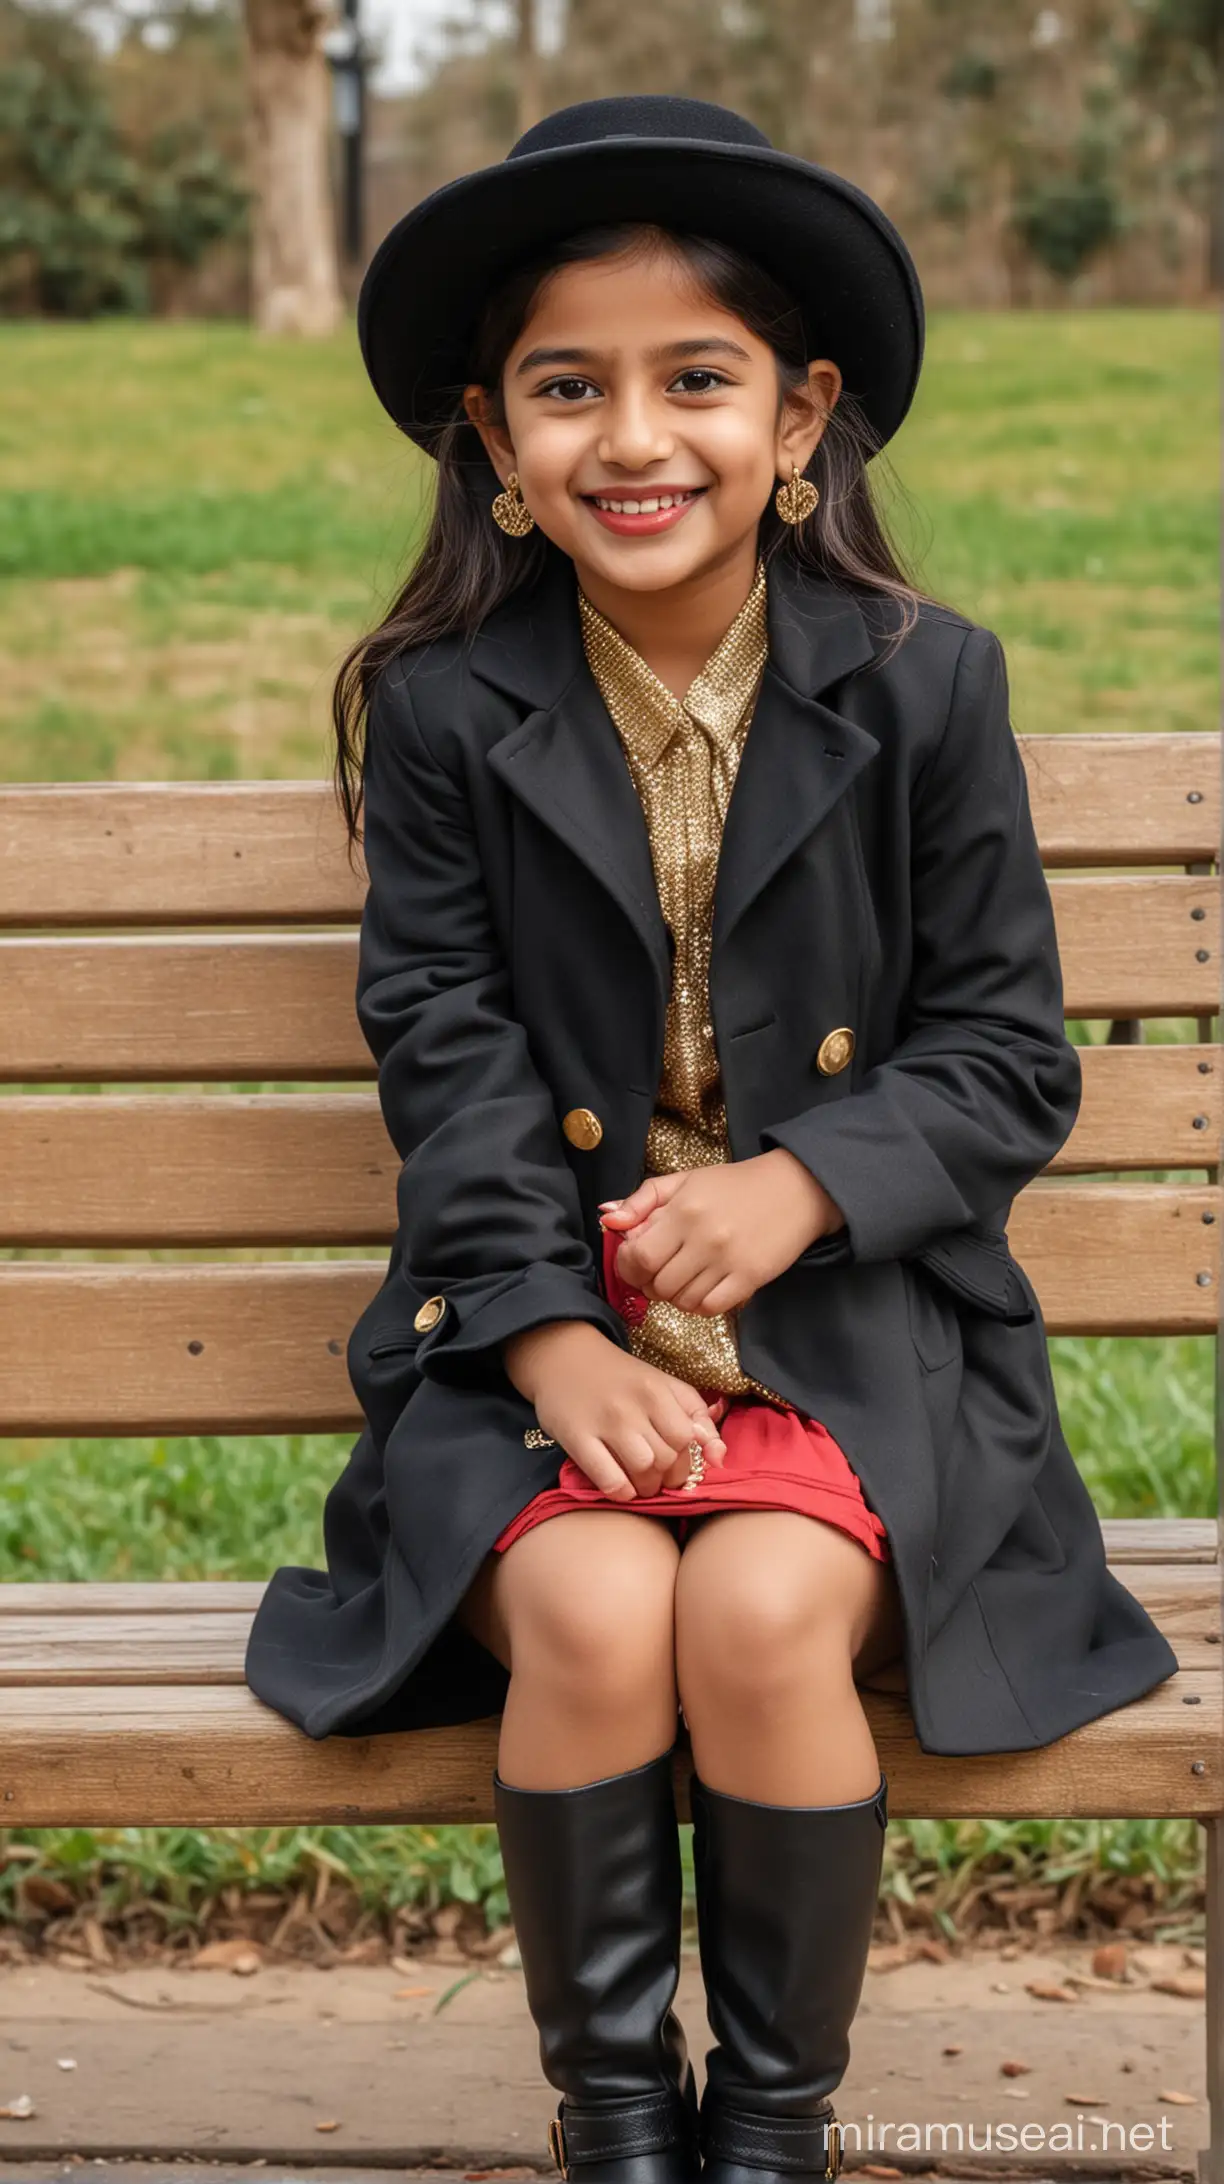 Adorable Indian Girl in Black Coat and Fancy Hat Sitting on Bench